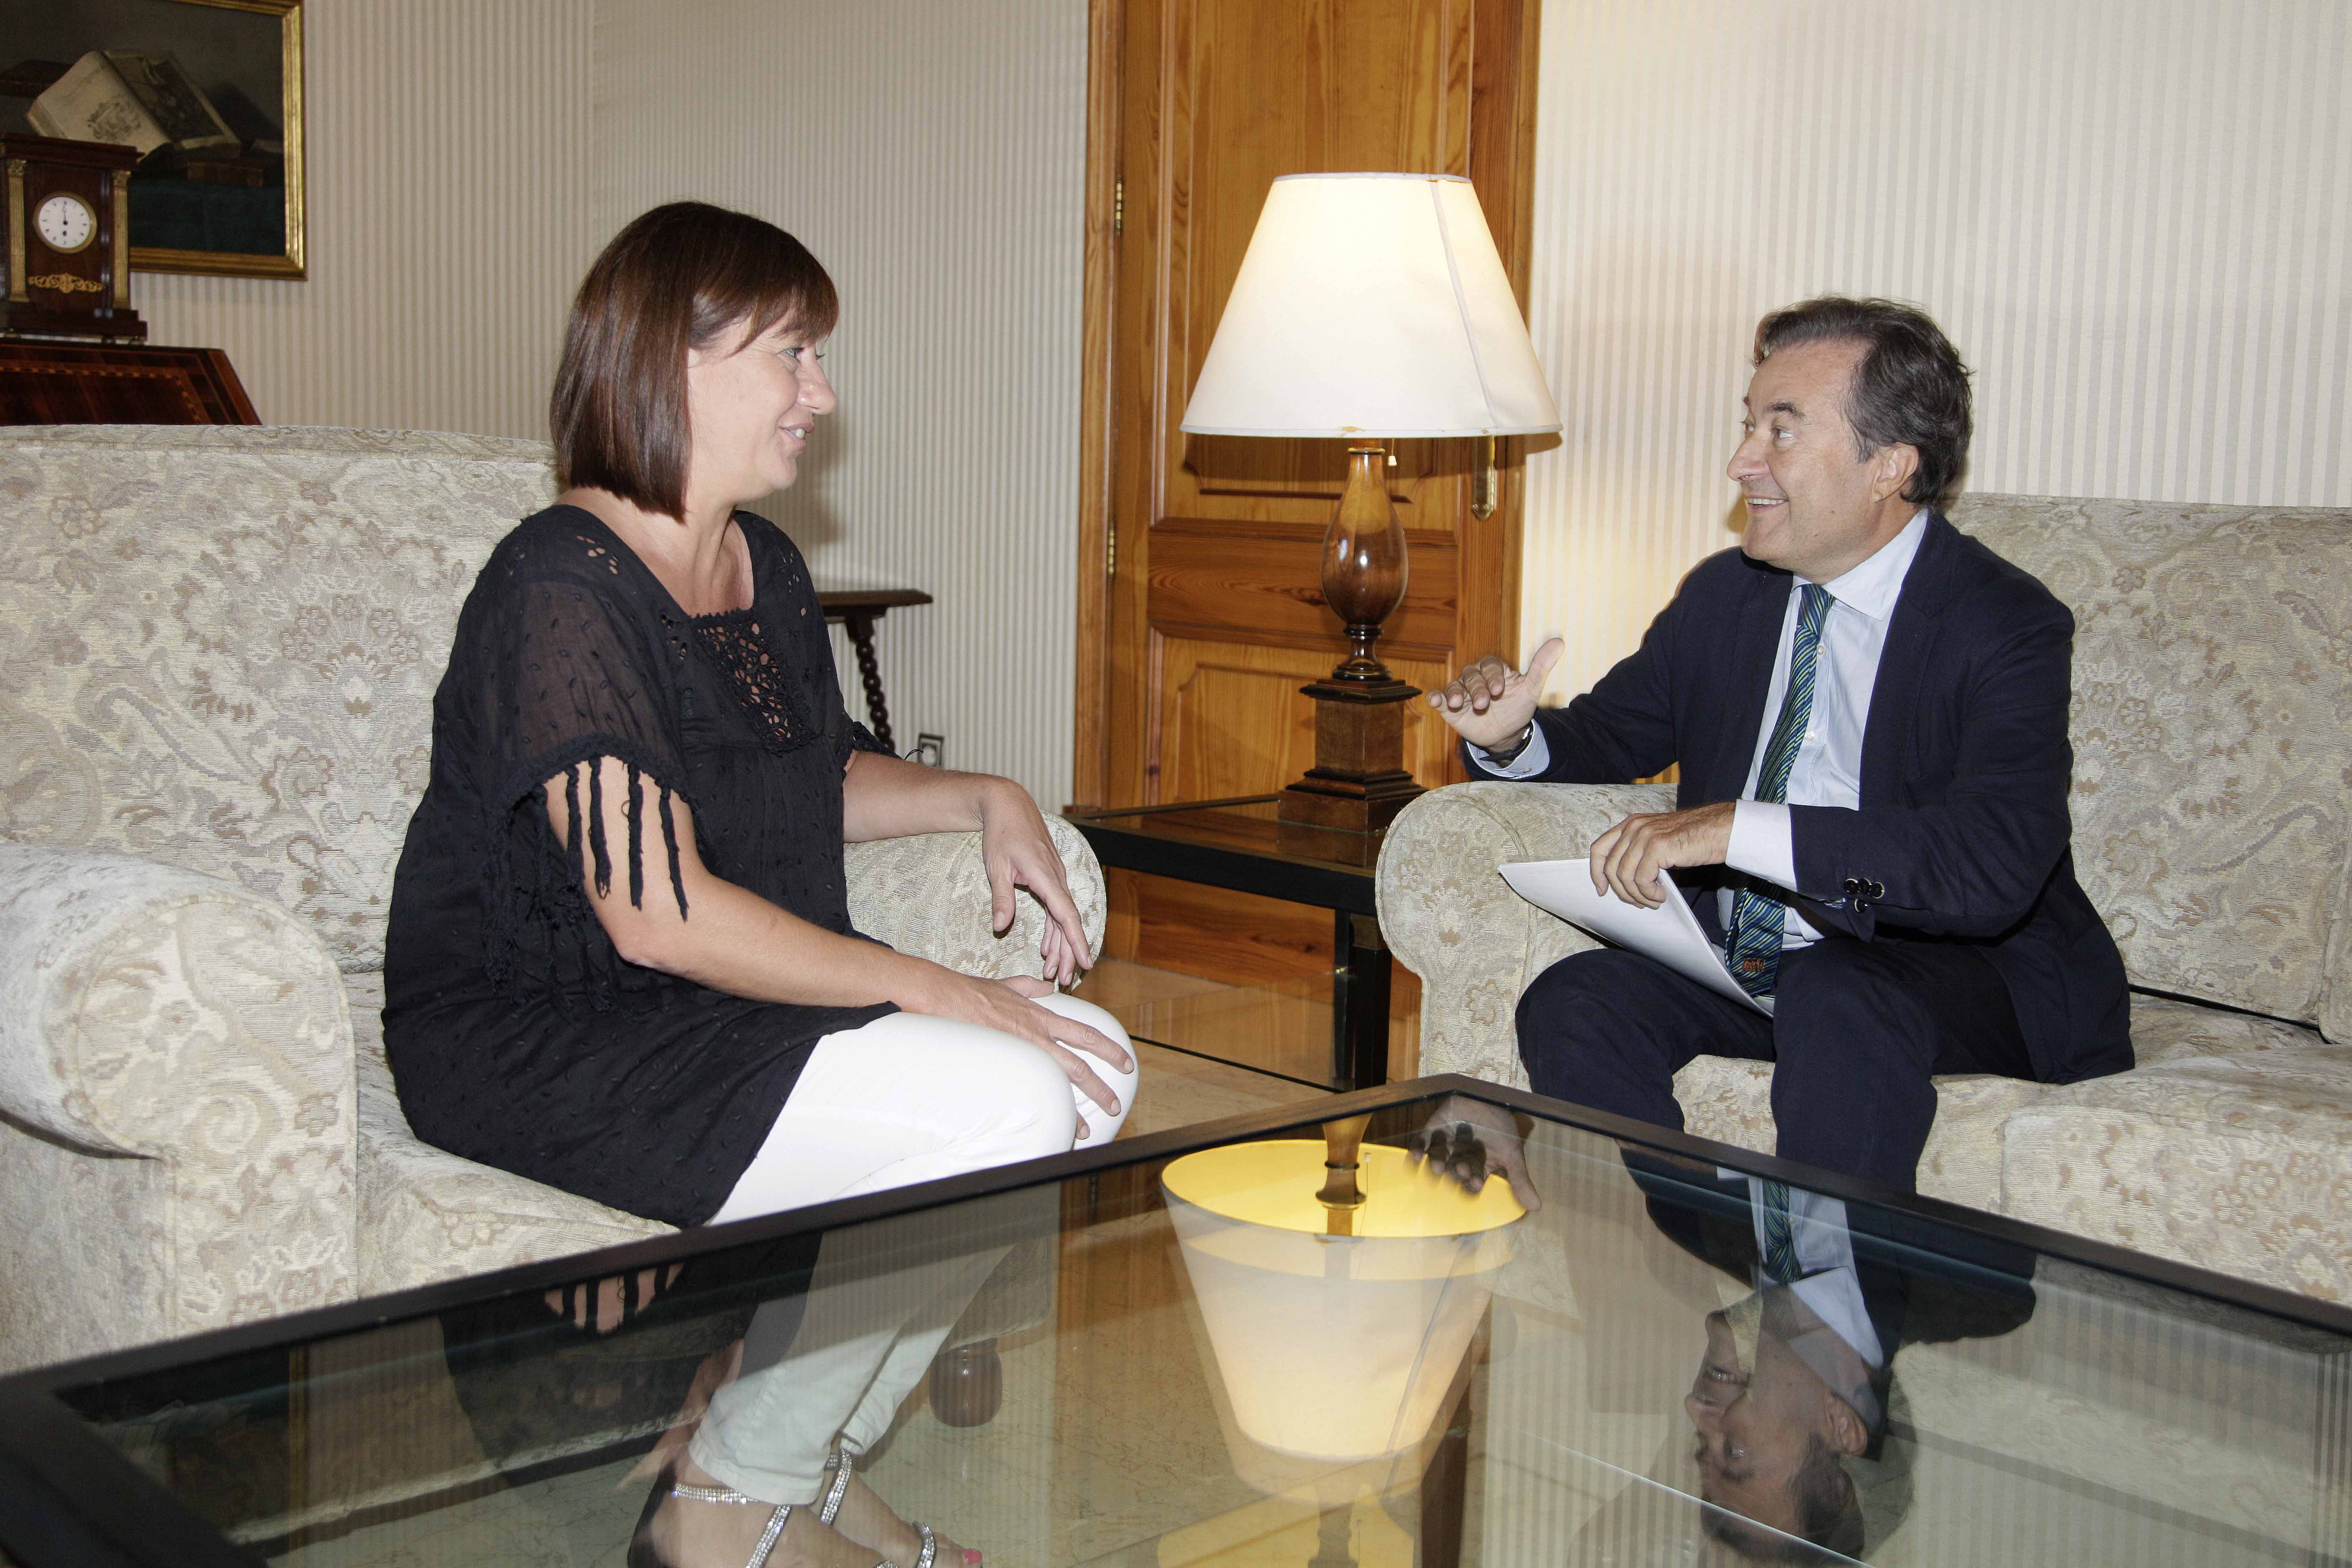 Meeting with Francina Armengol, president of Govern de les Illes Balears